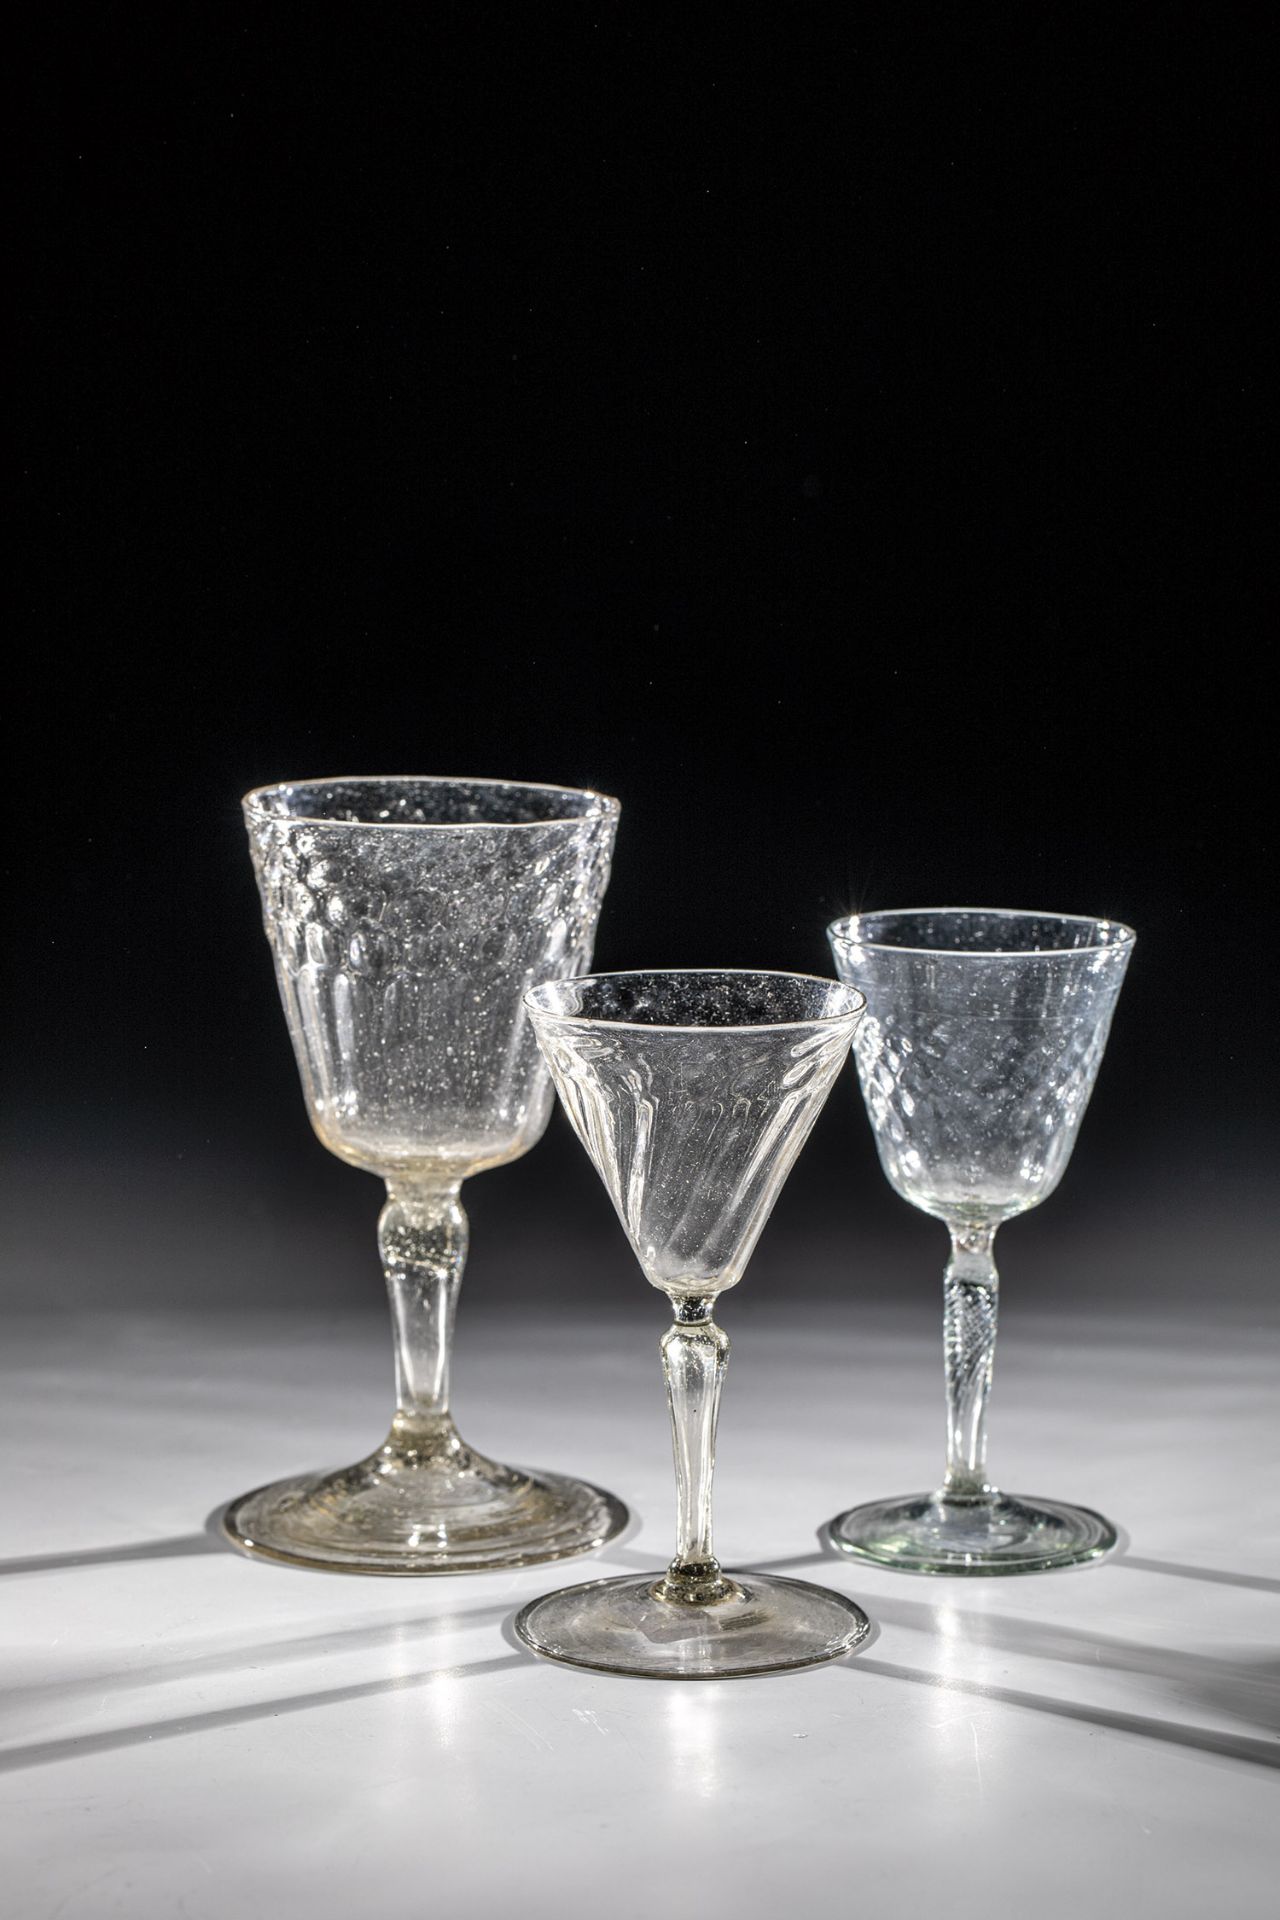 Three goblet glasses France, 17th/18th century Grey or smoke-coloured, thin-walled glass with